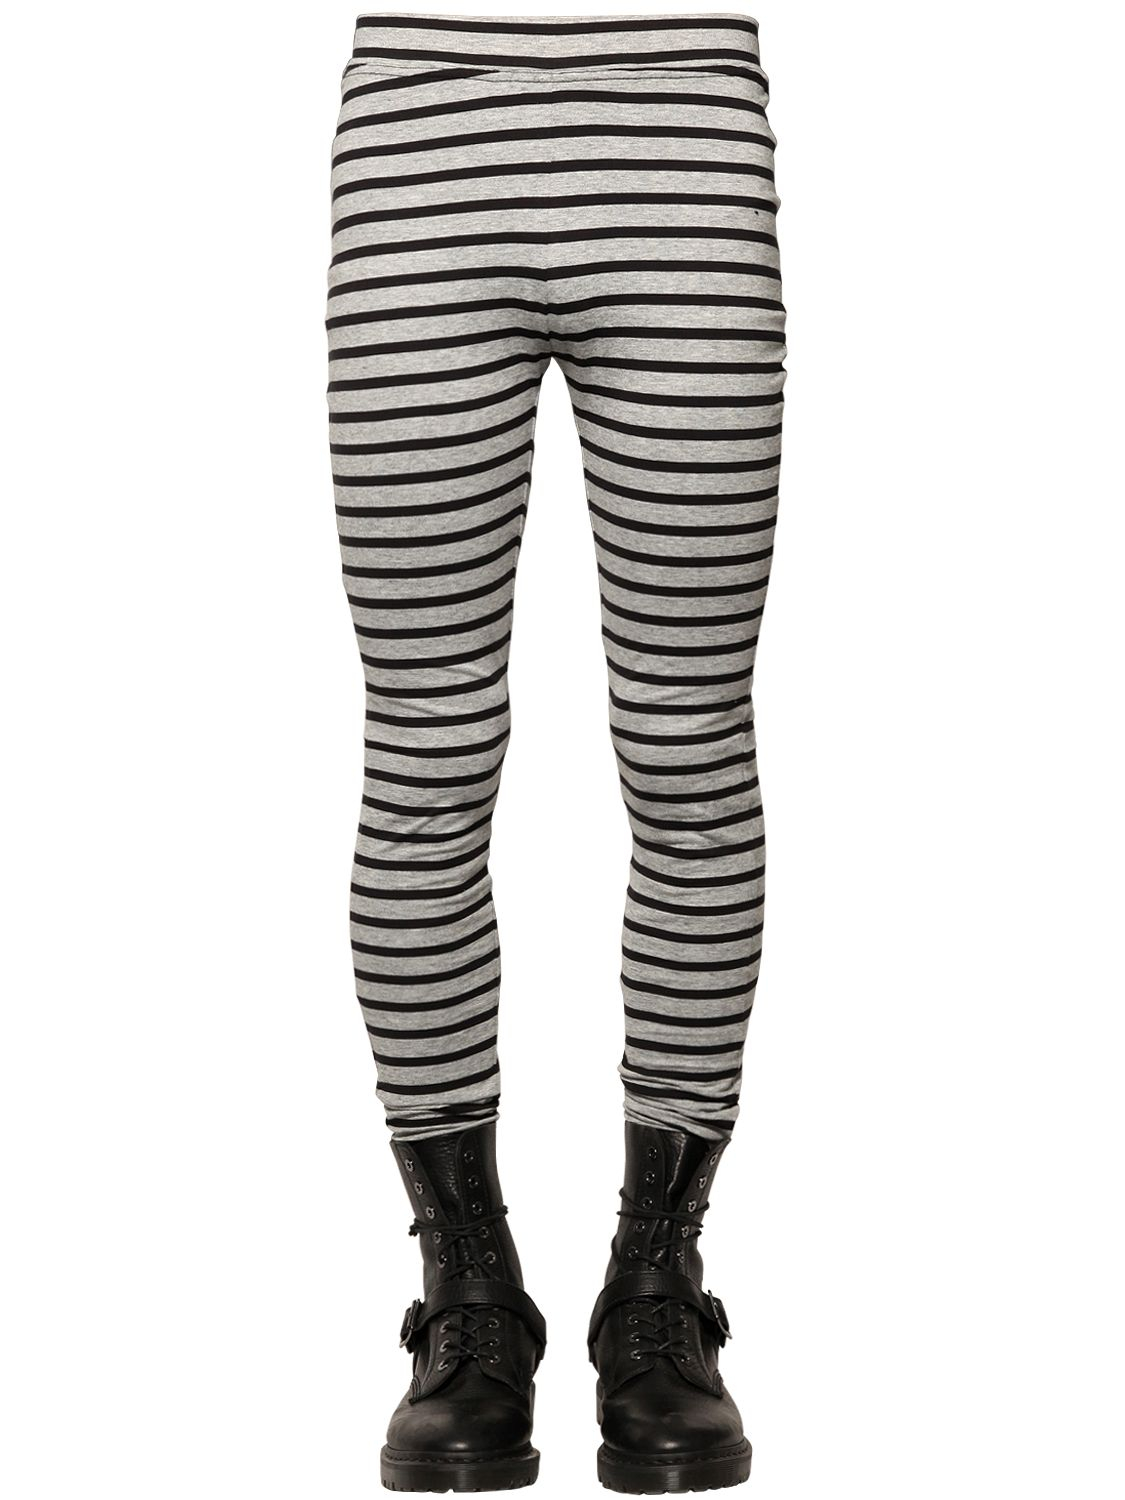 Lyst - Cheap monday Striped Cotton Jersey Leggings in Gray for Men